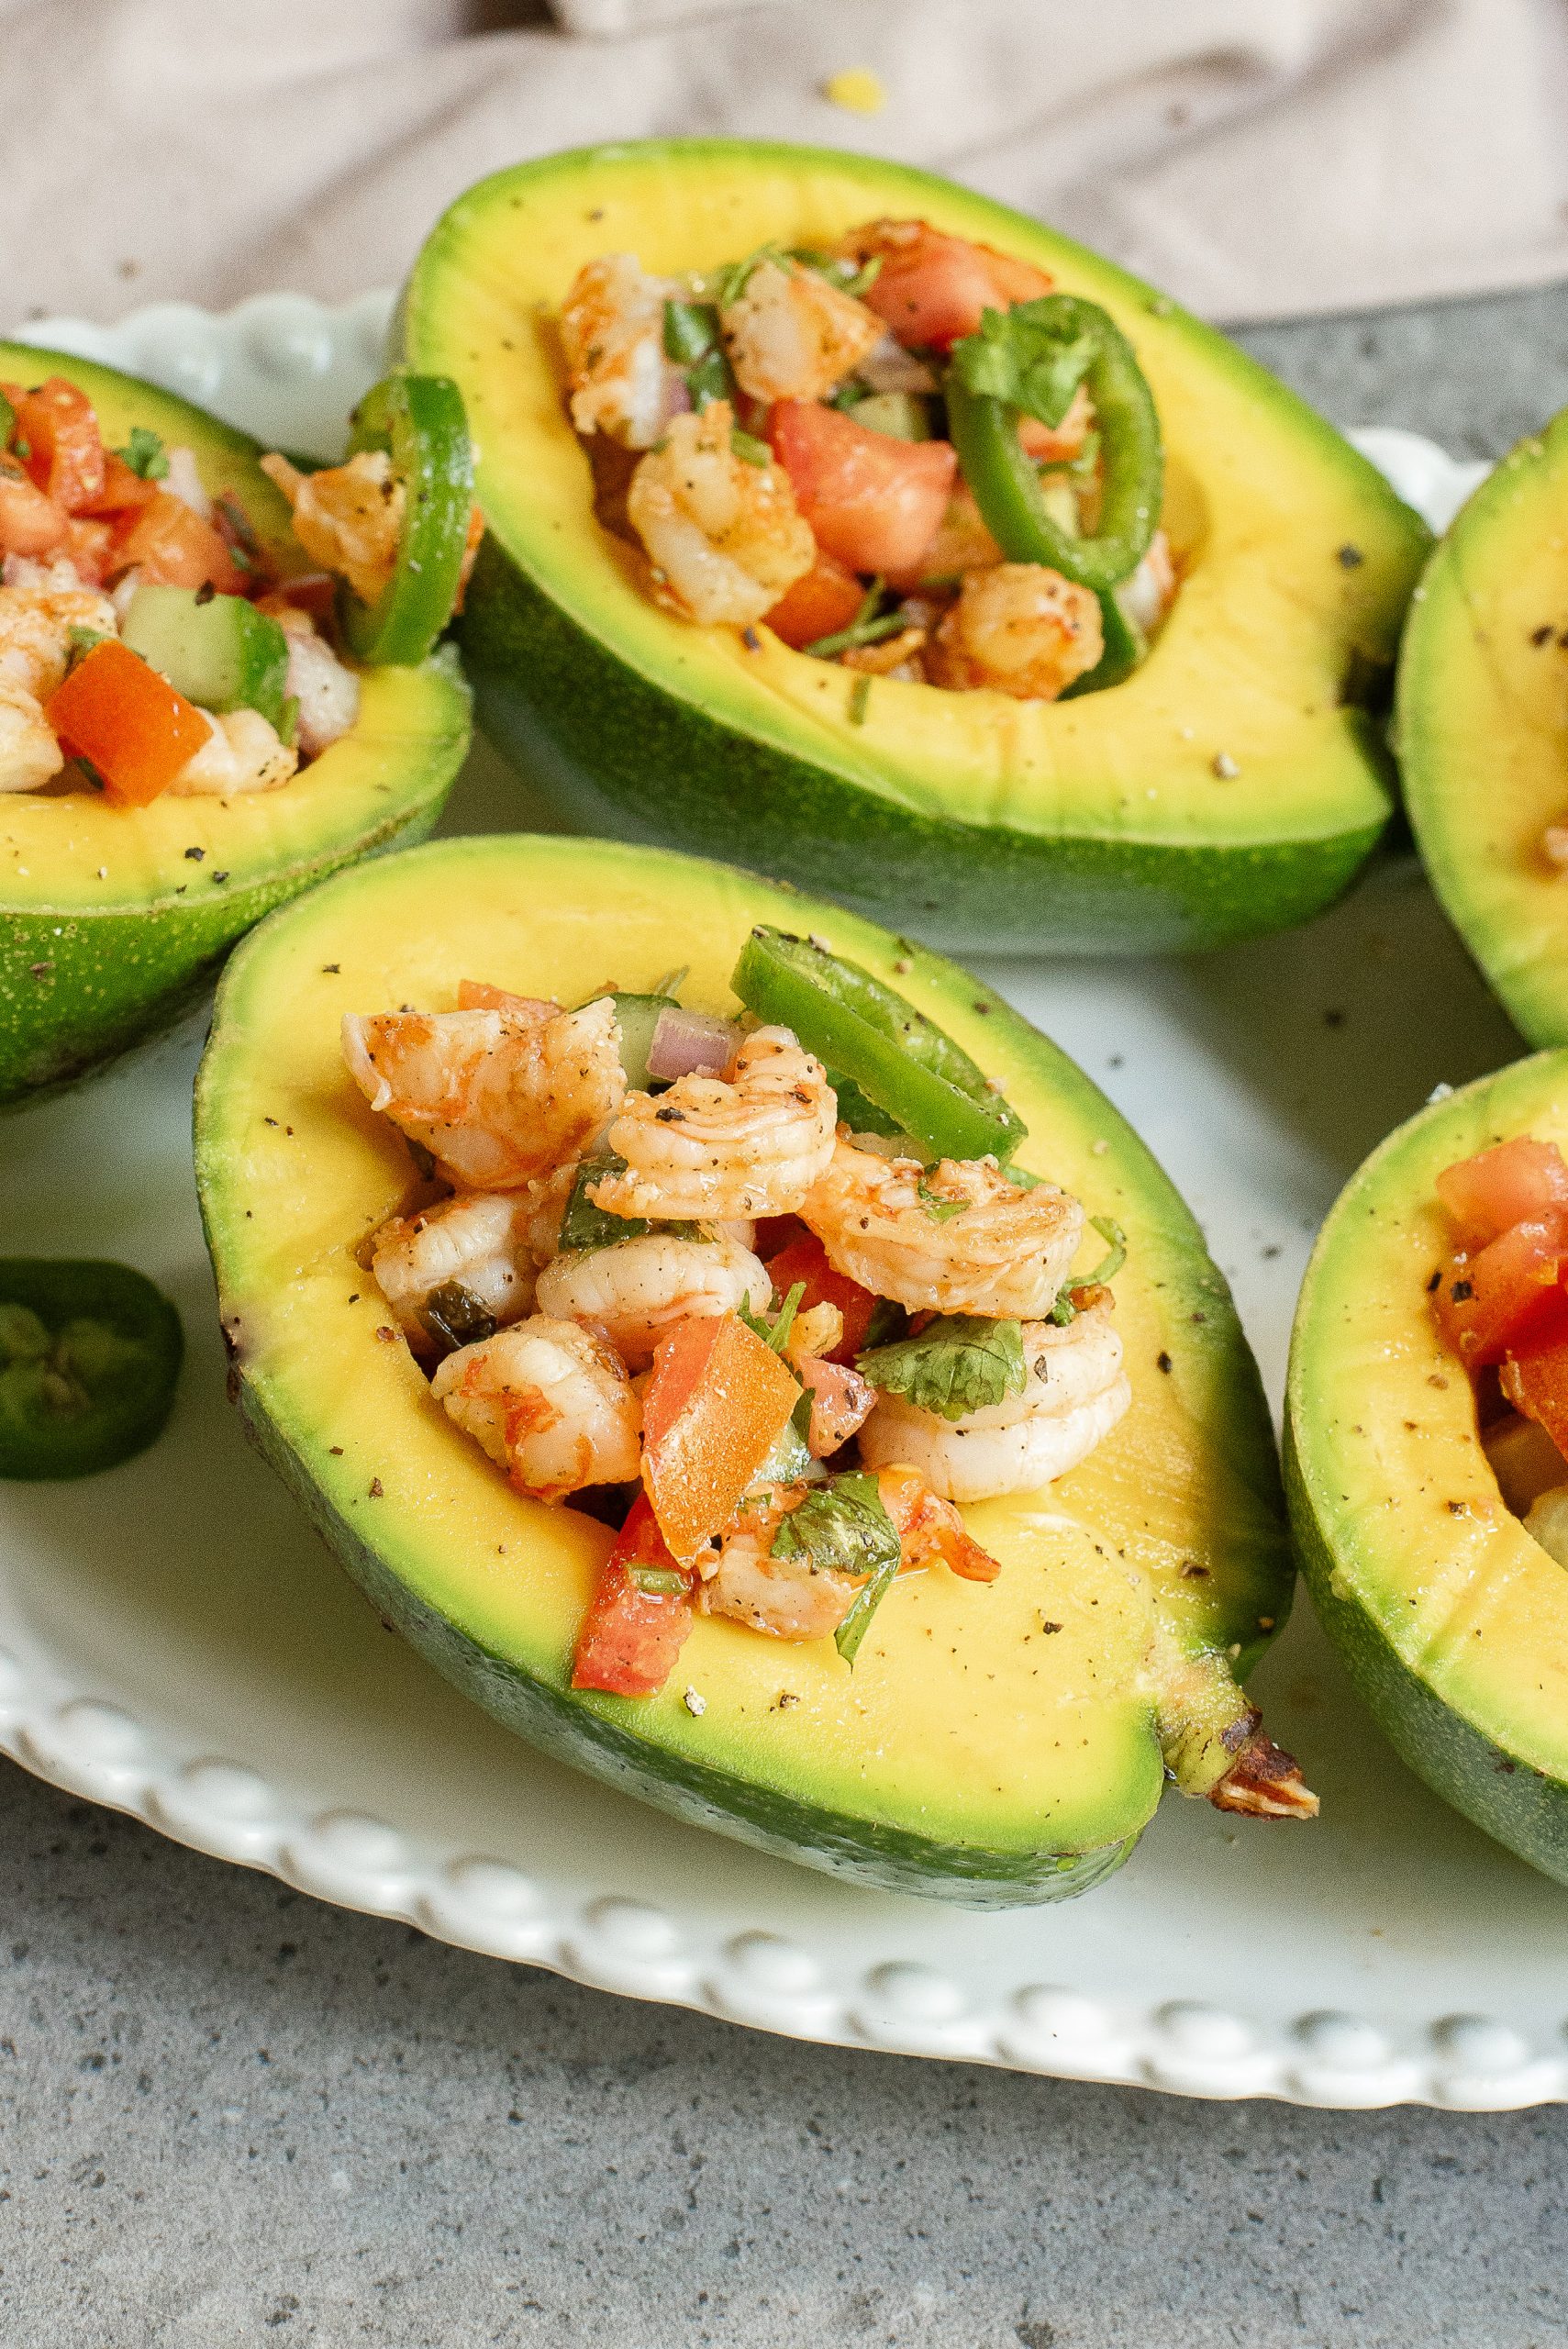 Avocado halves filled with a shrimp and diced vegetable salad, served on a white plate.